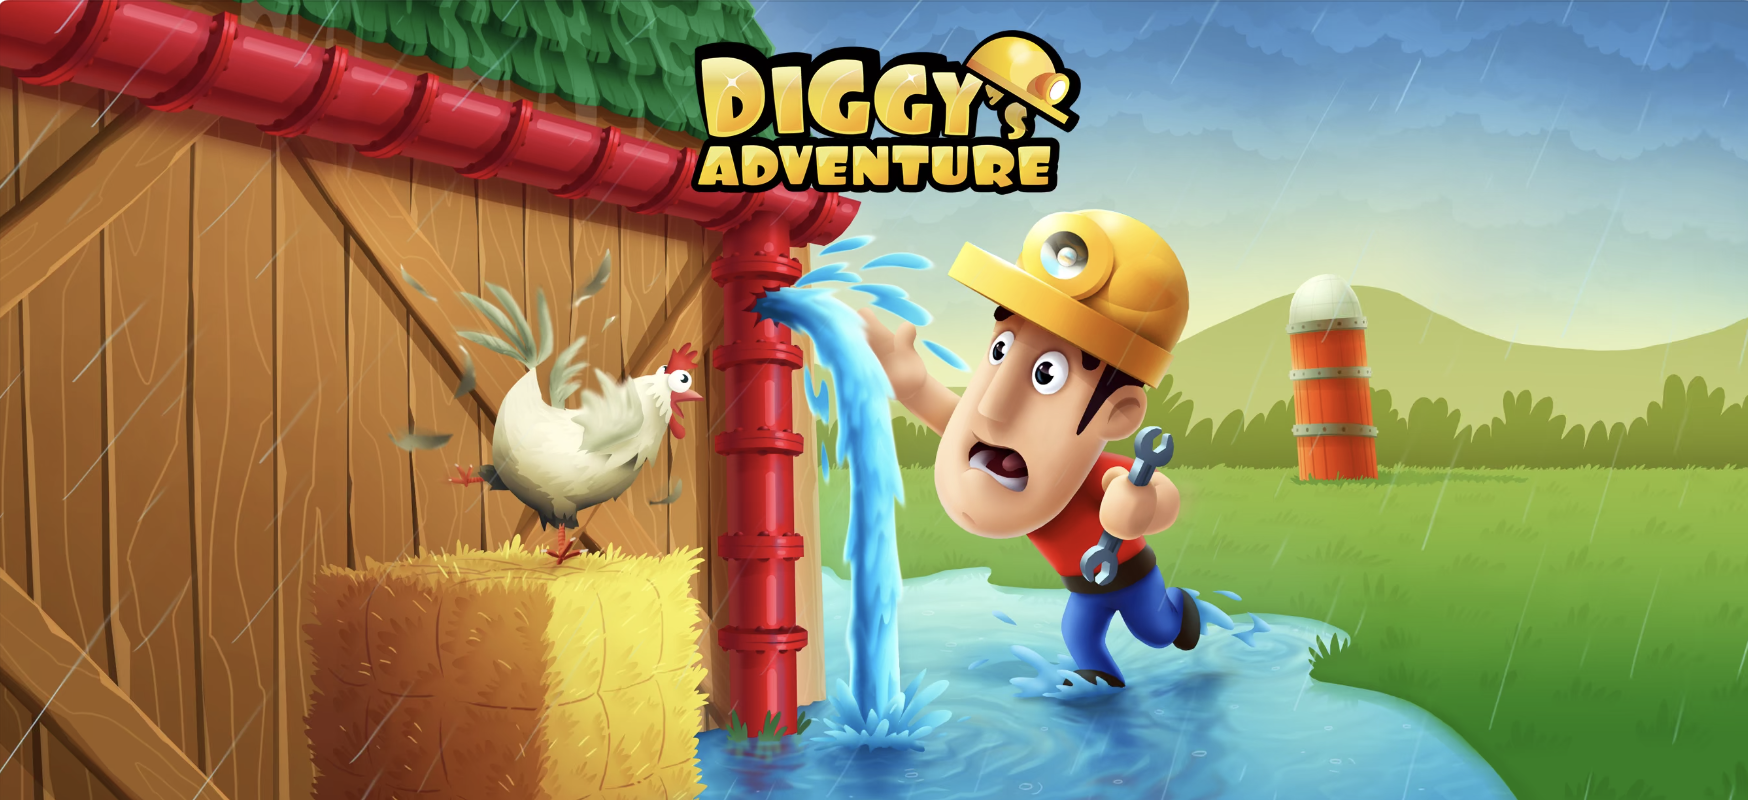 Diggy's character is trying to fix a pipe while a chicken watches